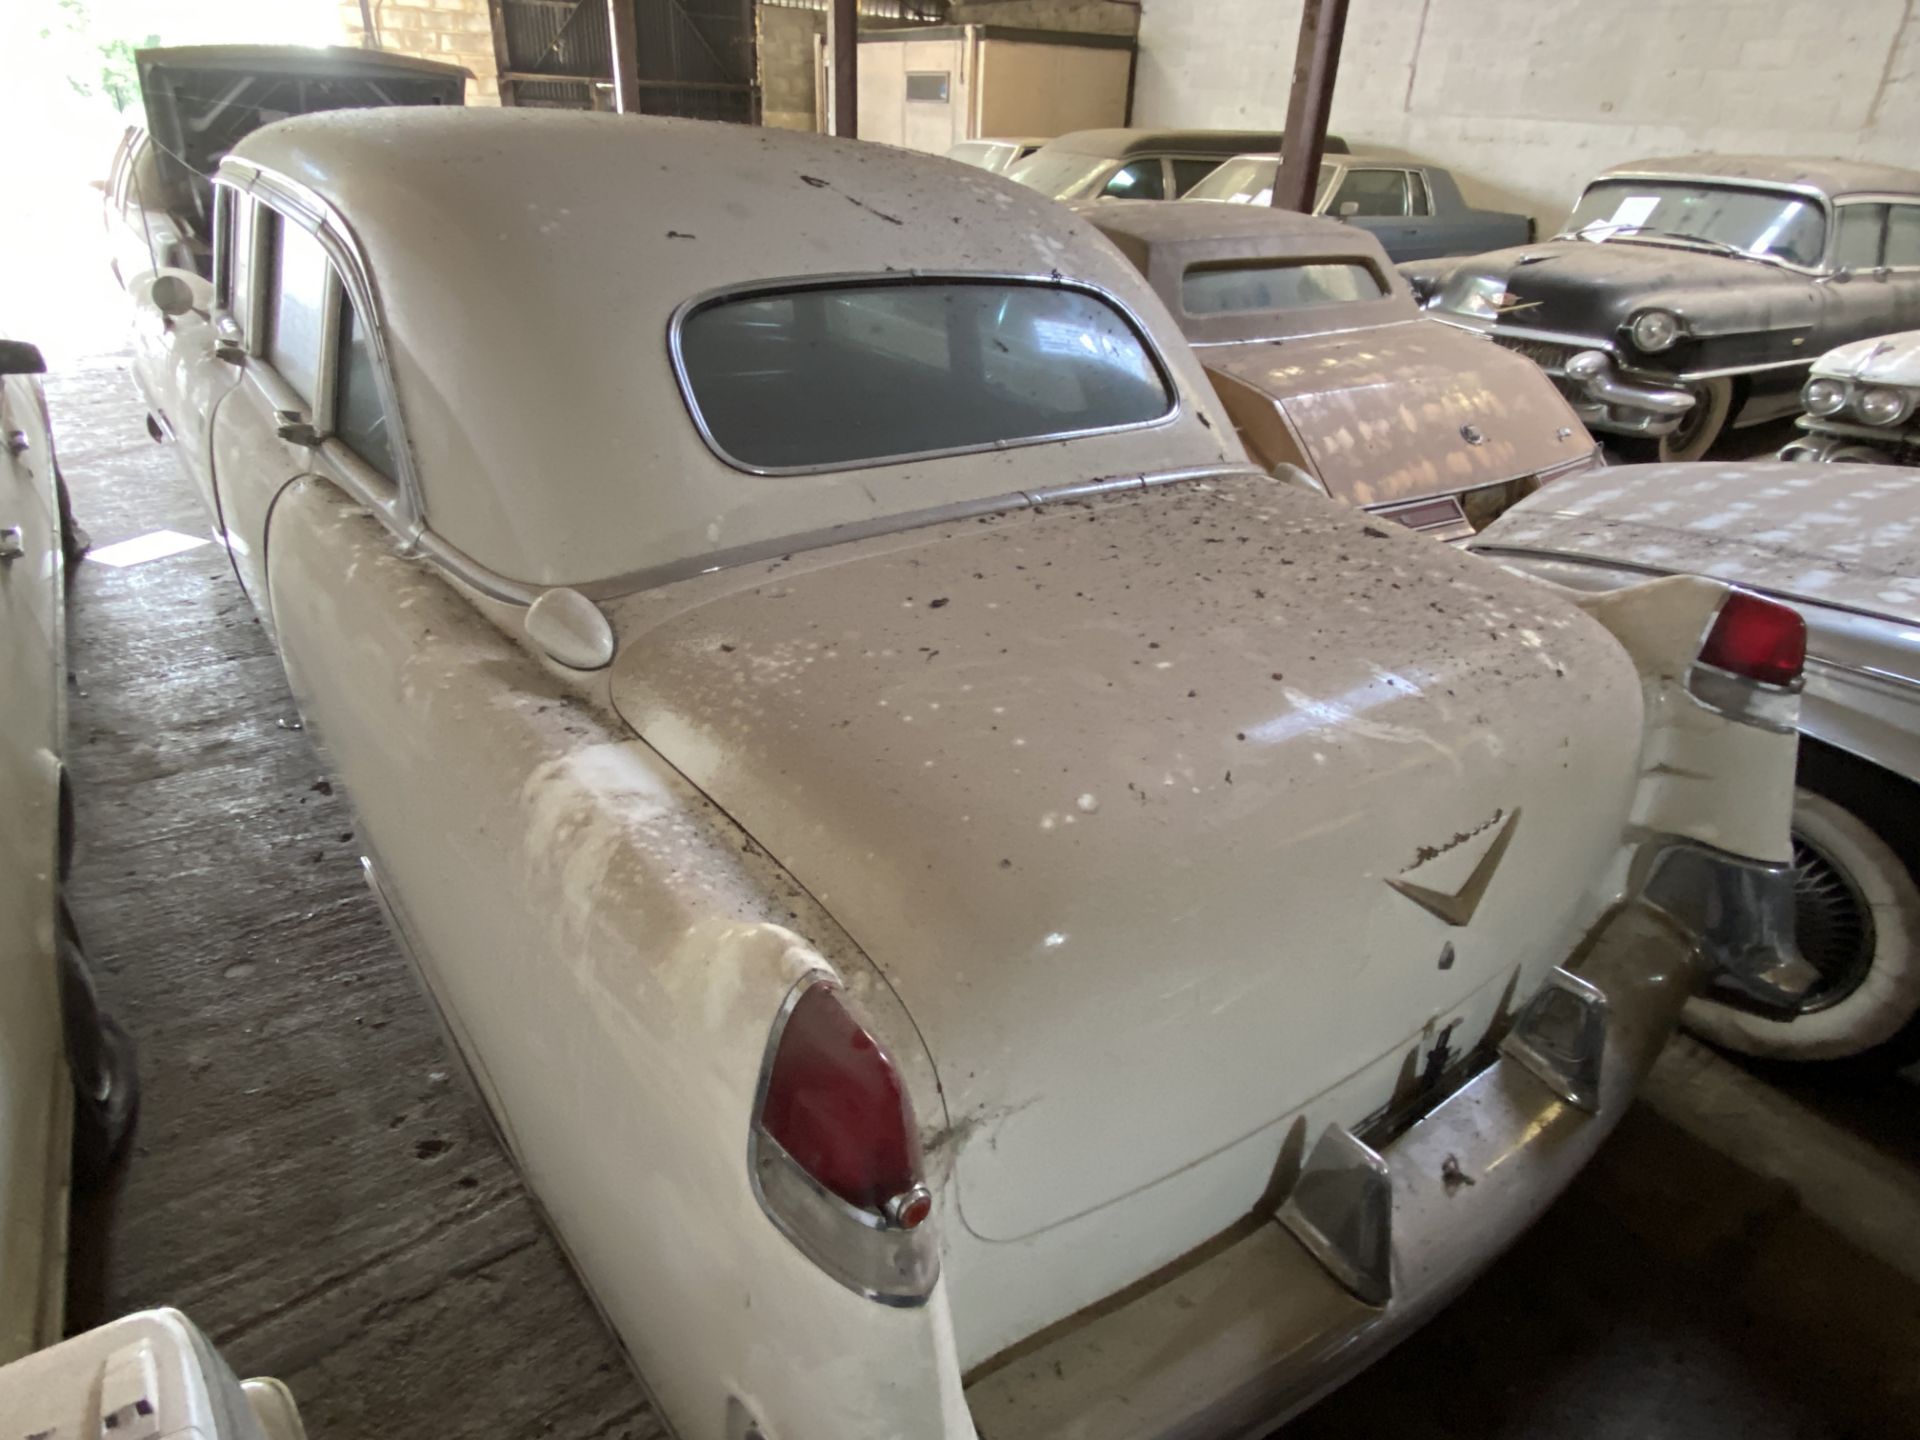 APPROX 1954 CADILLAC FLEETWOOD 75 FACTORY LIMO IN WHITE - BODY NO: 404) WITH KEYS - Image 5 of 17